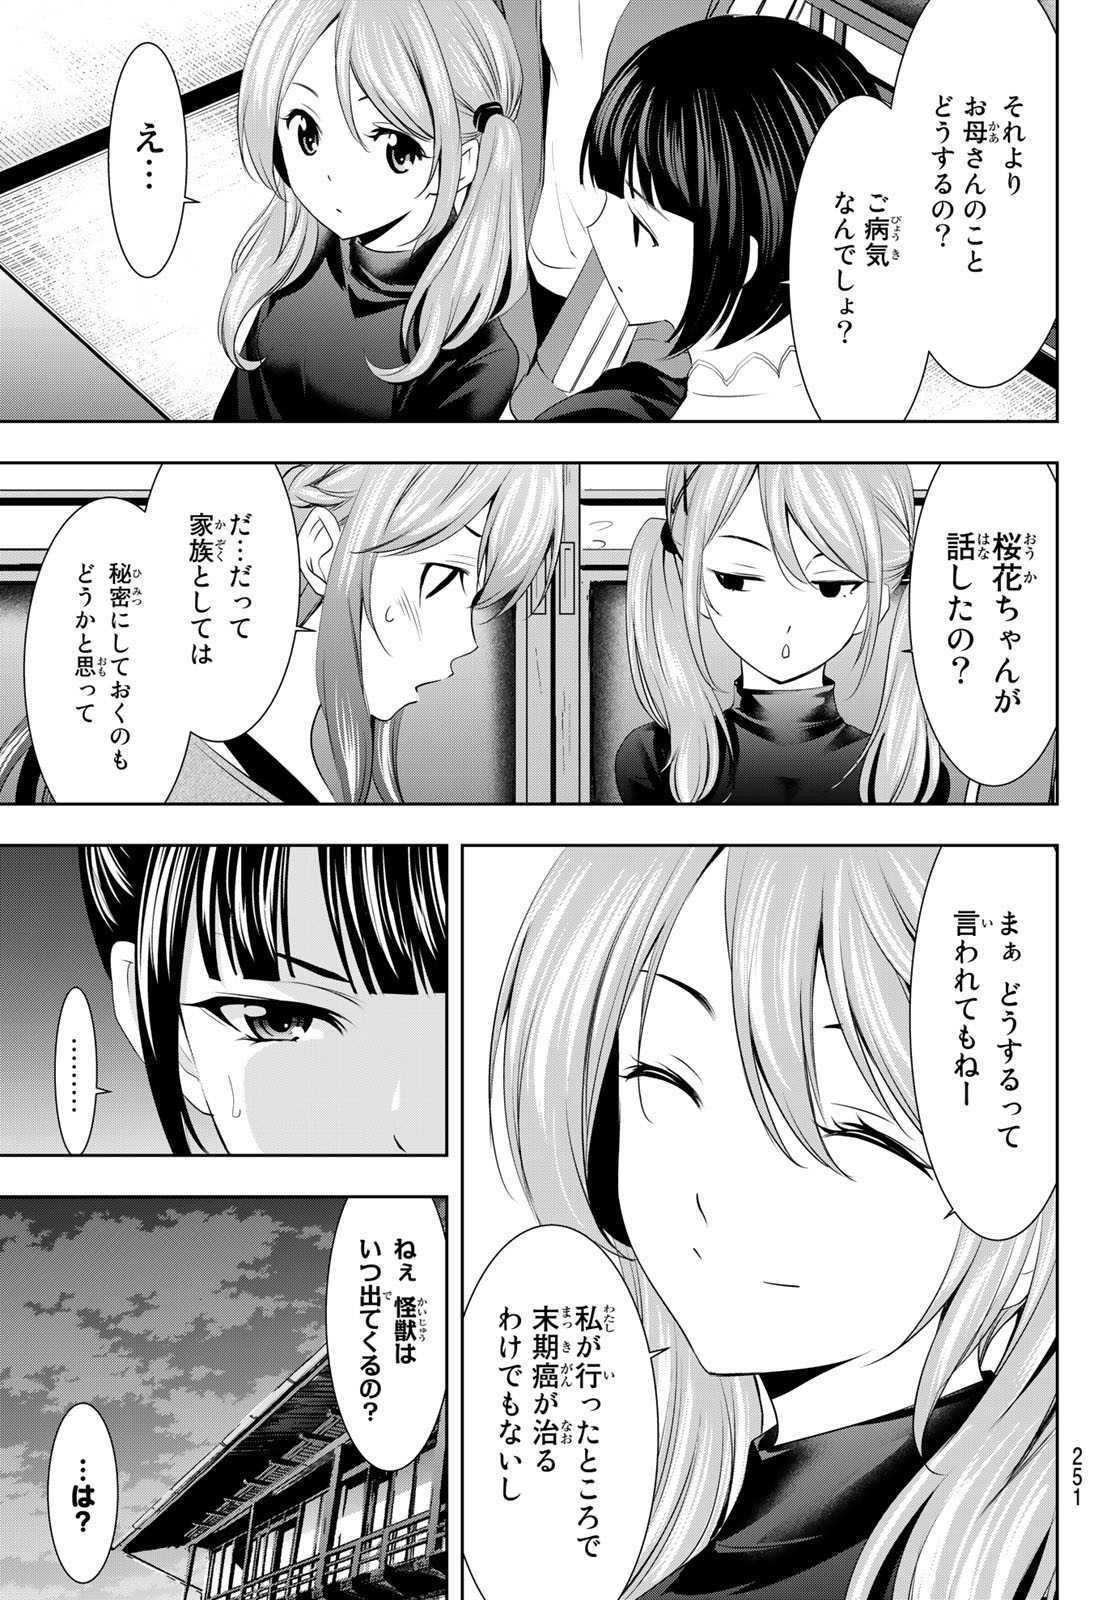 Goddess-Cafe-Terrace - Chapter 072 - Page 3